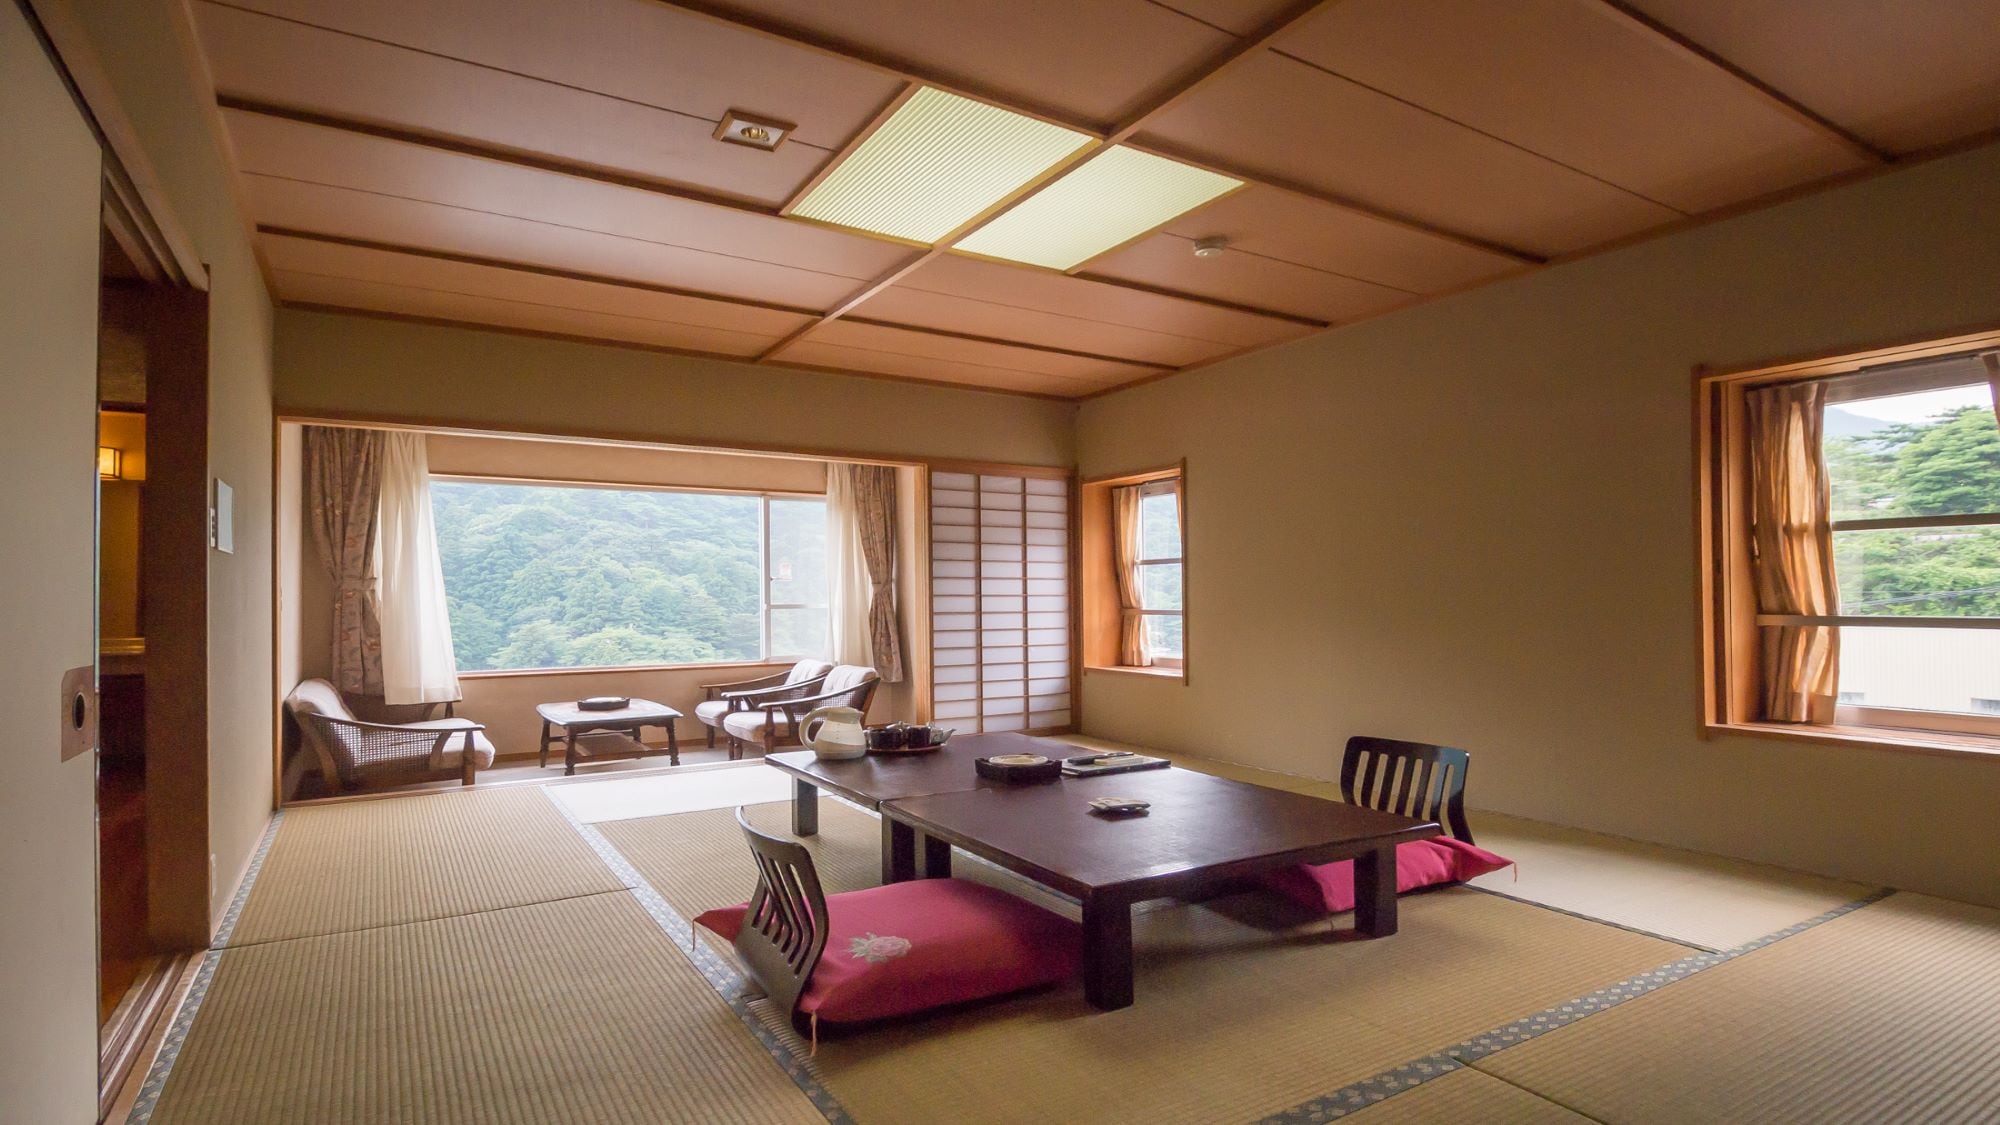 [Example of a spacious Japanese-style room] This is a room type with a spacious Japanese-style room and a wide veranda.